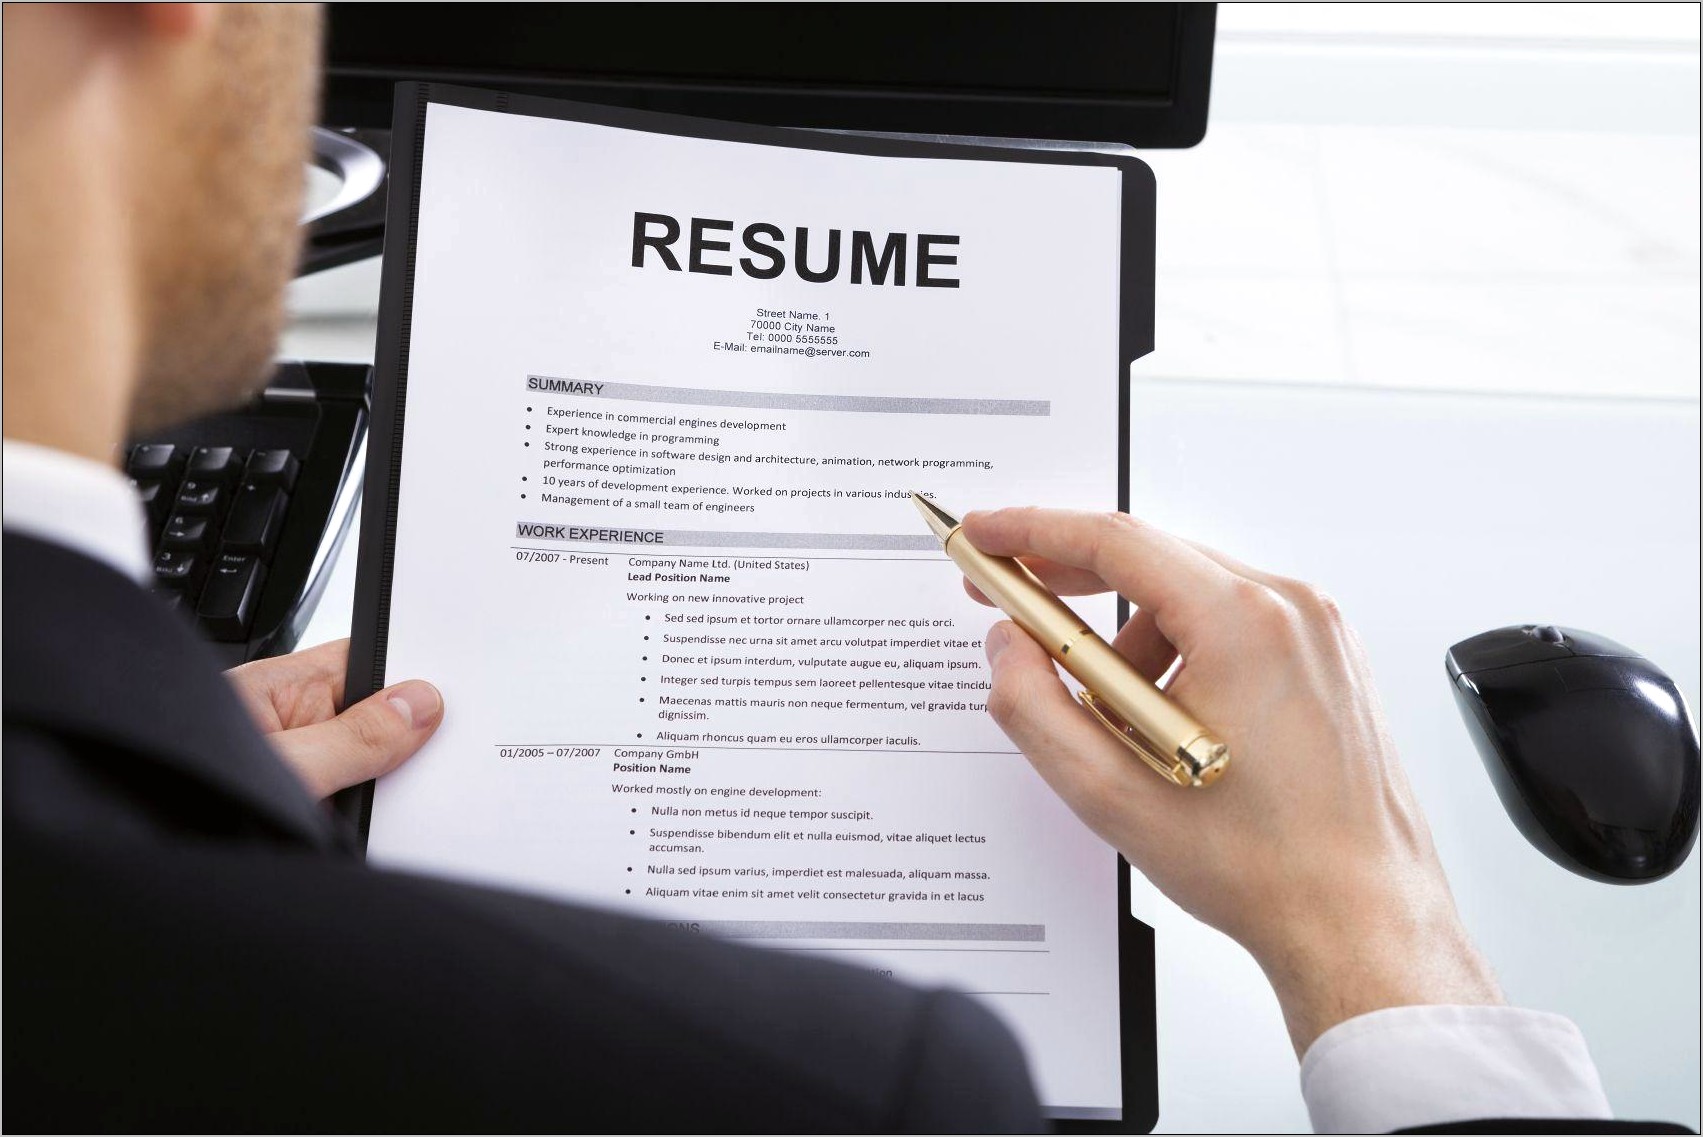 Resume Experience Descriptions Have A Period